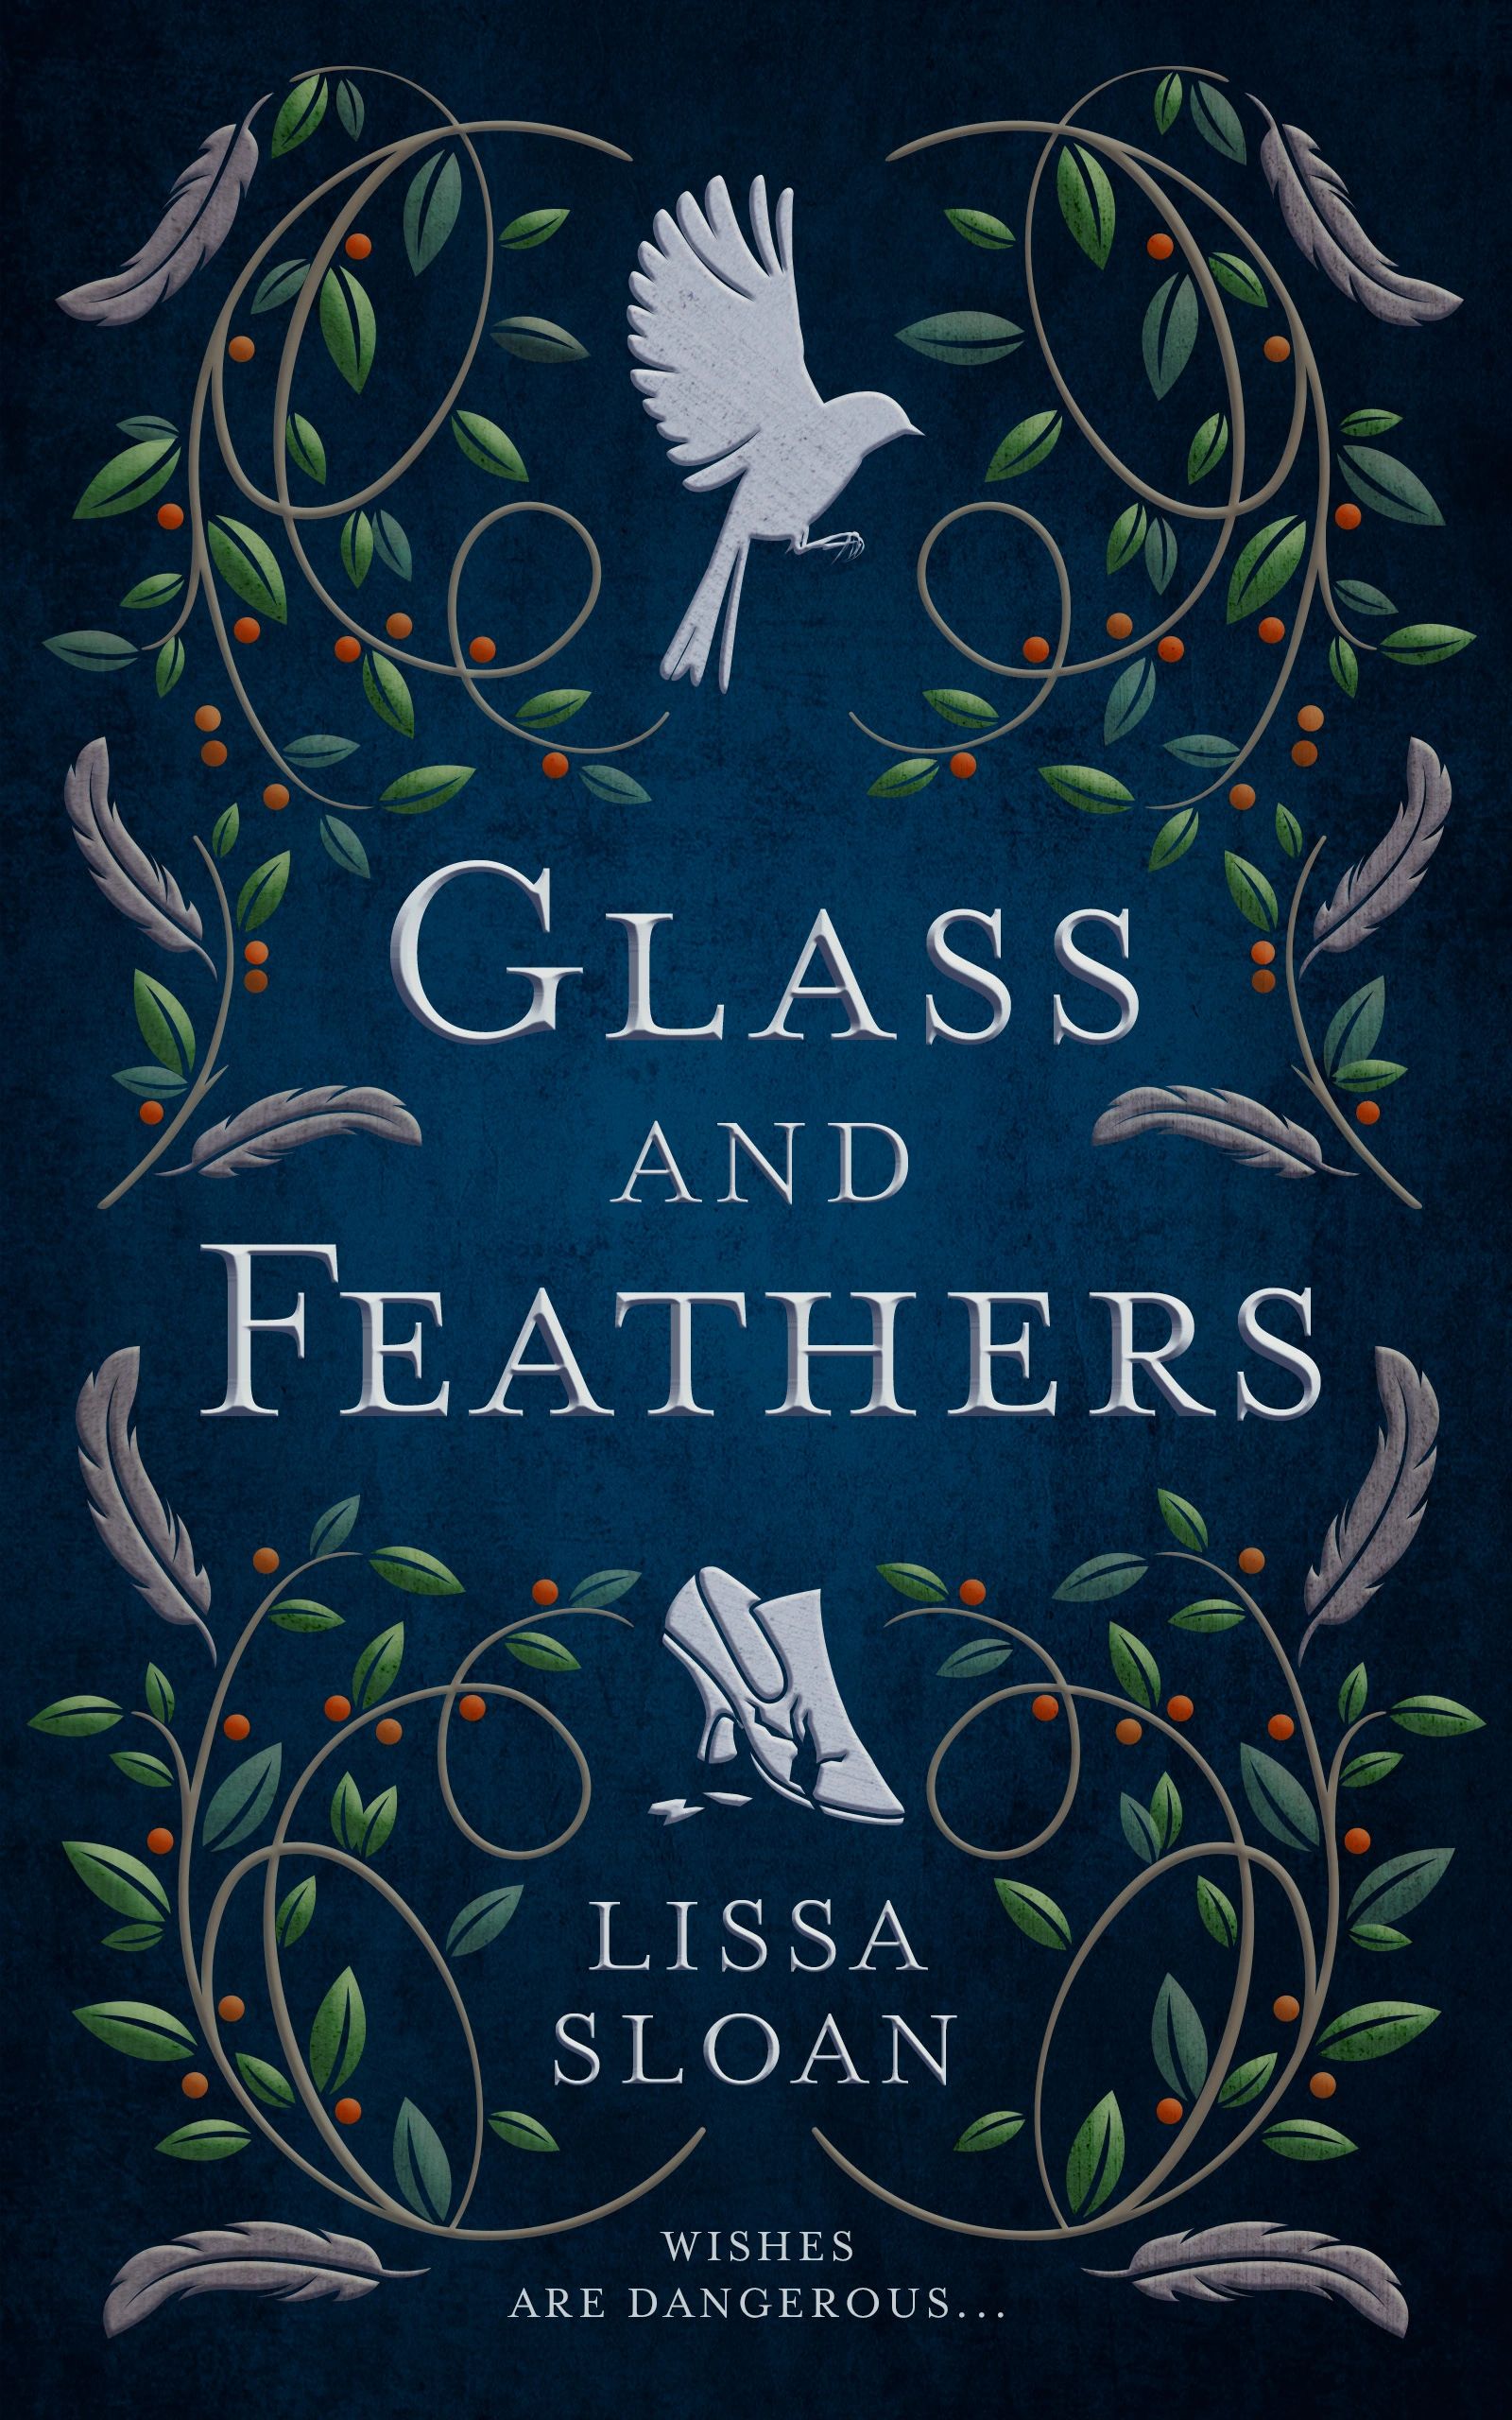 Book cover featuring a sparrow in flight and a broken glass slipper surrounded in vines and feathers